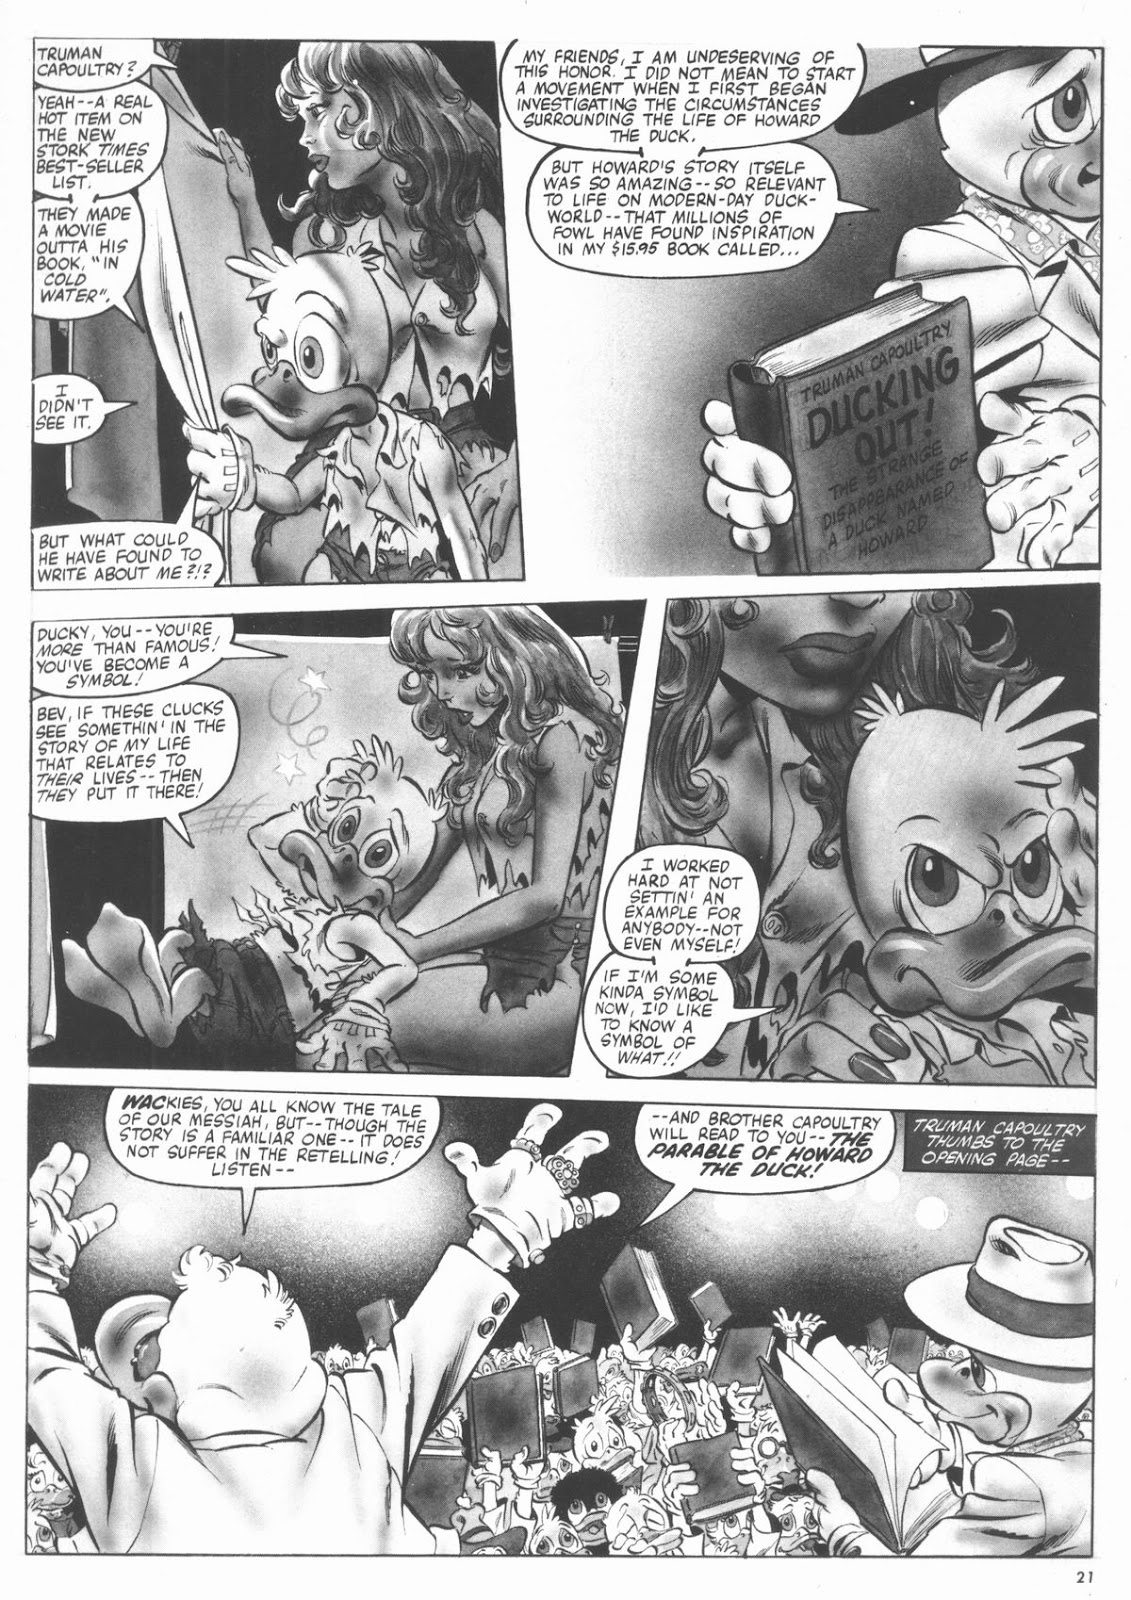 Howard the Duck (1979) Issue #6 #6 - English 21